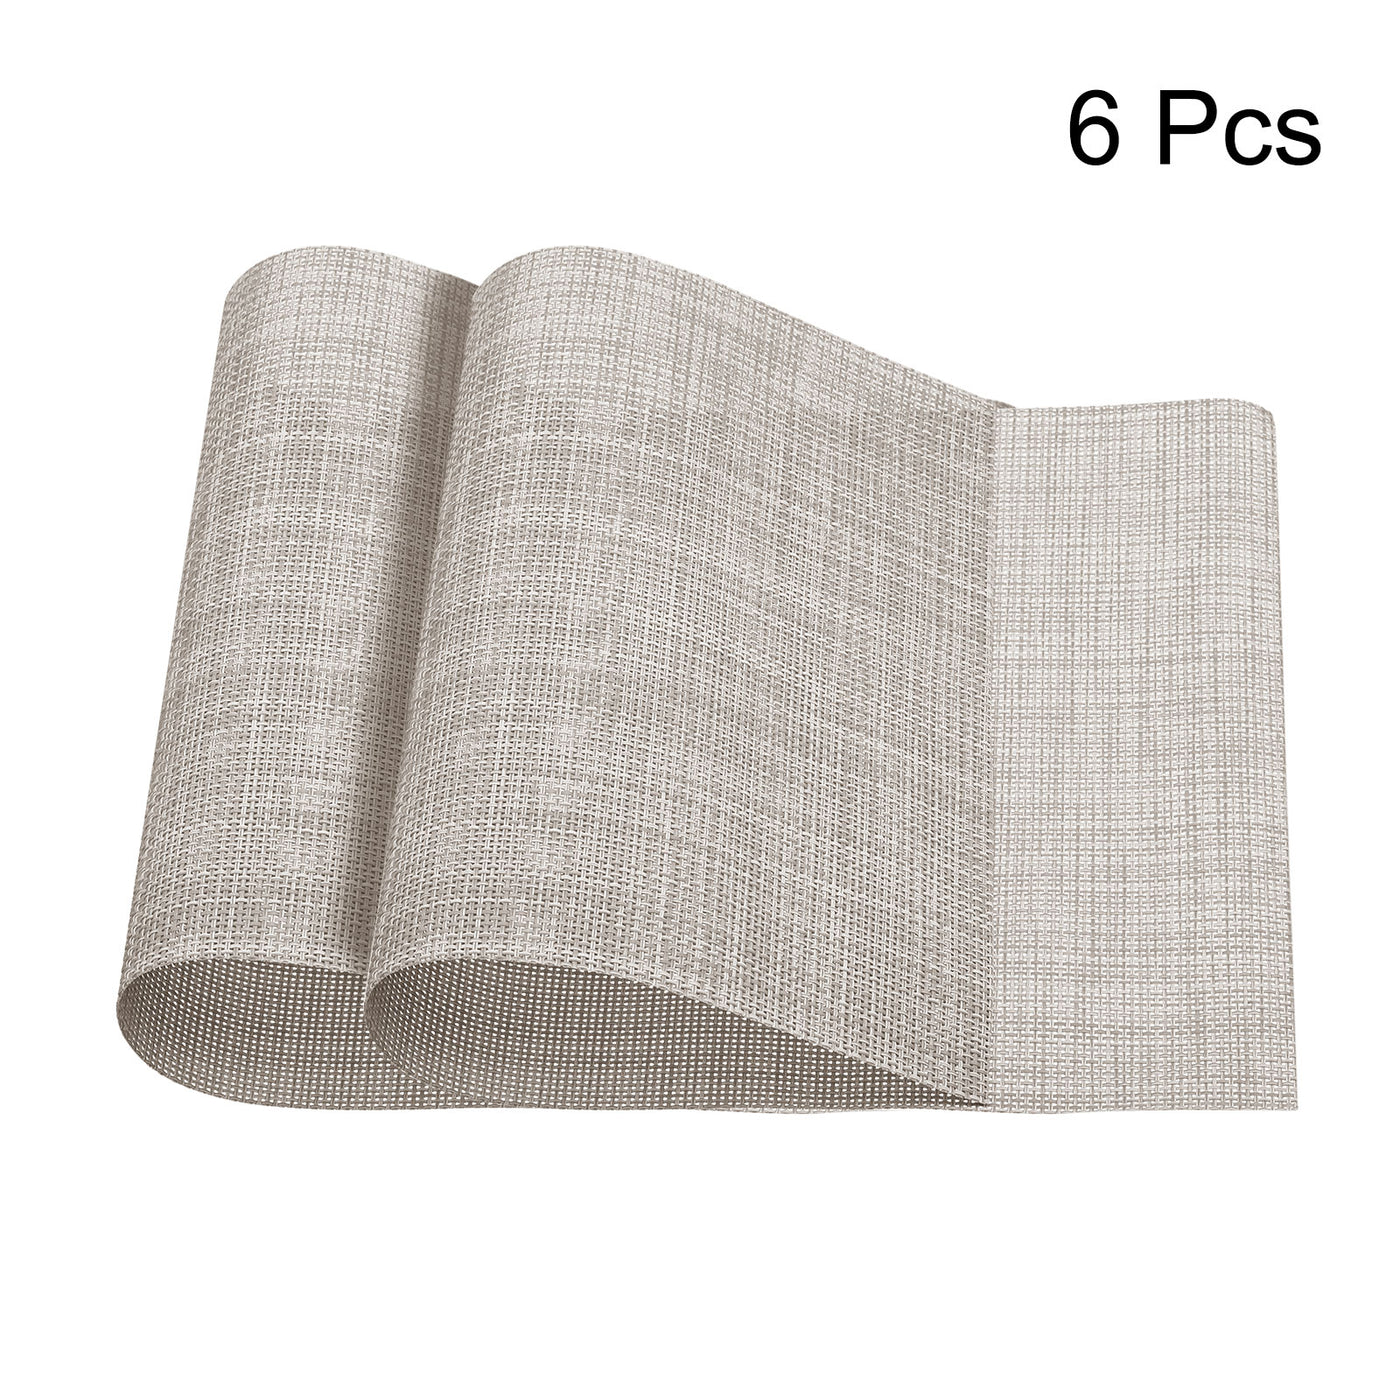 uxcell Uxcell Place Mats, 450x300mm Table Mats Set of 6 PVC Washable Woven Placemat Beige